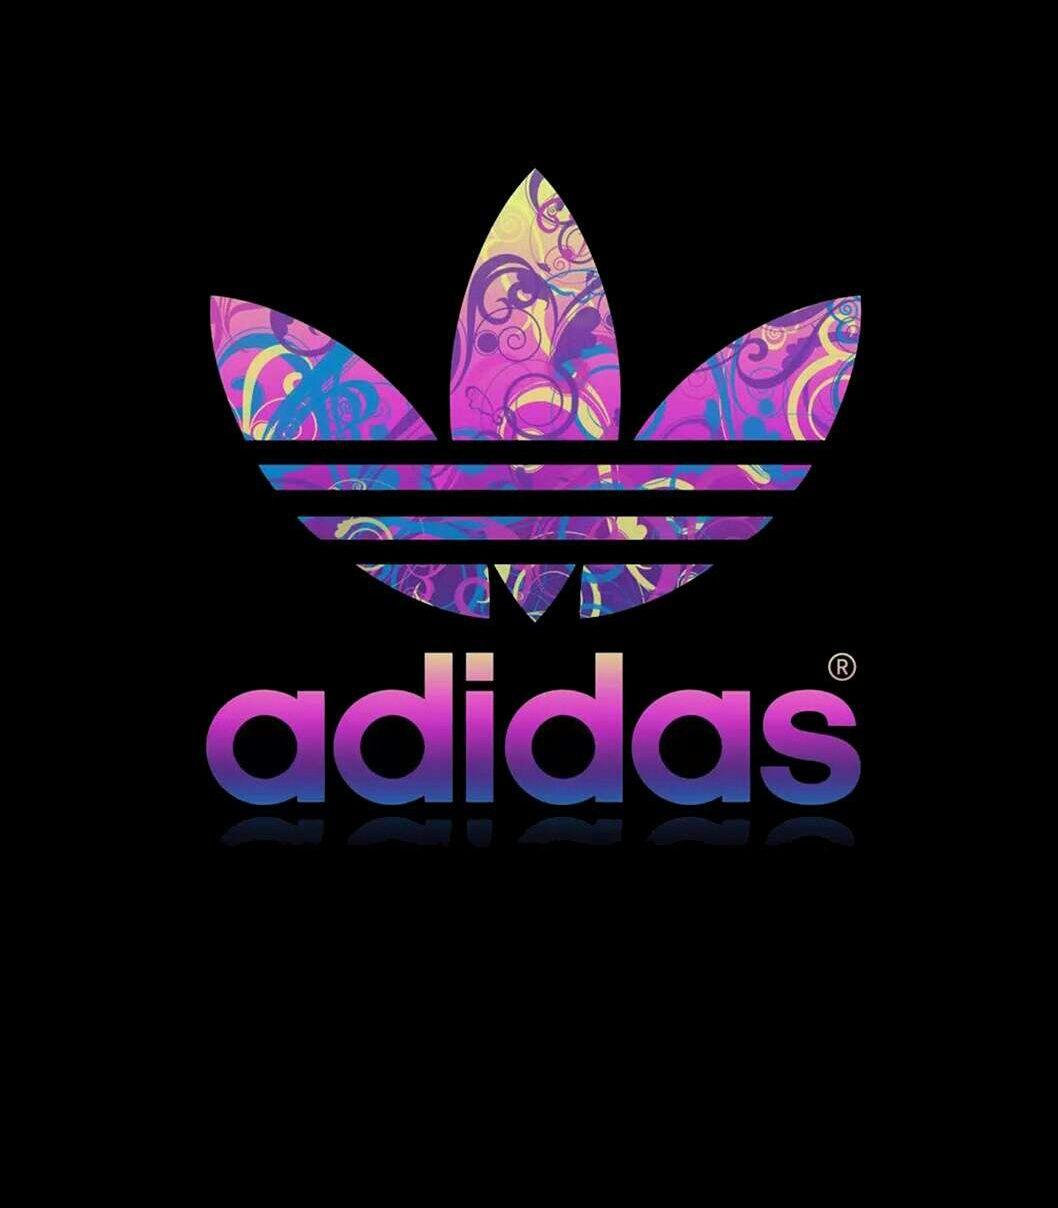 Adidas Girly Wallpapers - Top Free Adidas Girly Backgrounds ...